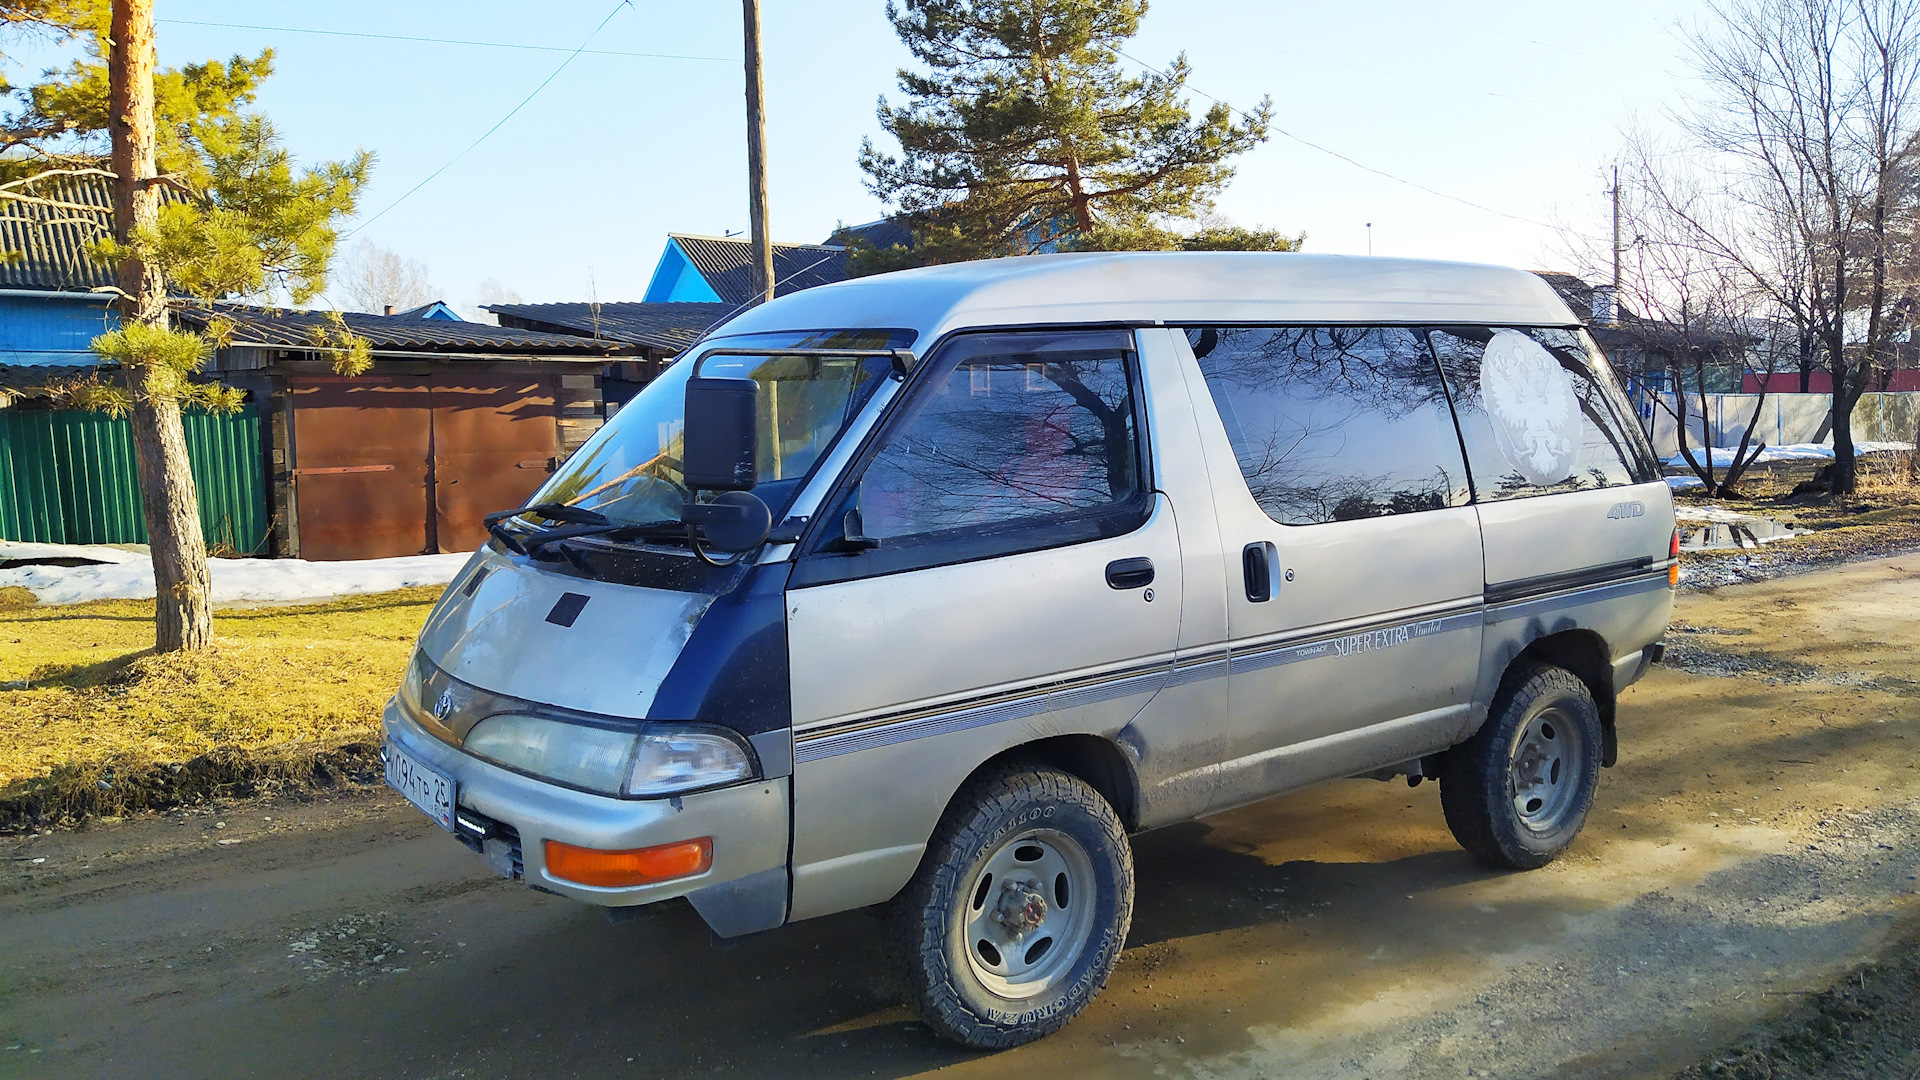 Toyota Town Ace 1984. Town Ace 31. Таун айс 89 года. Toyota Town Ace 3, 95 года.